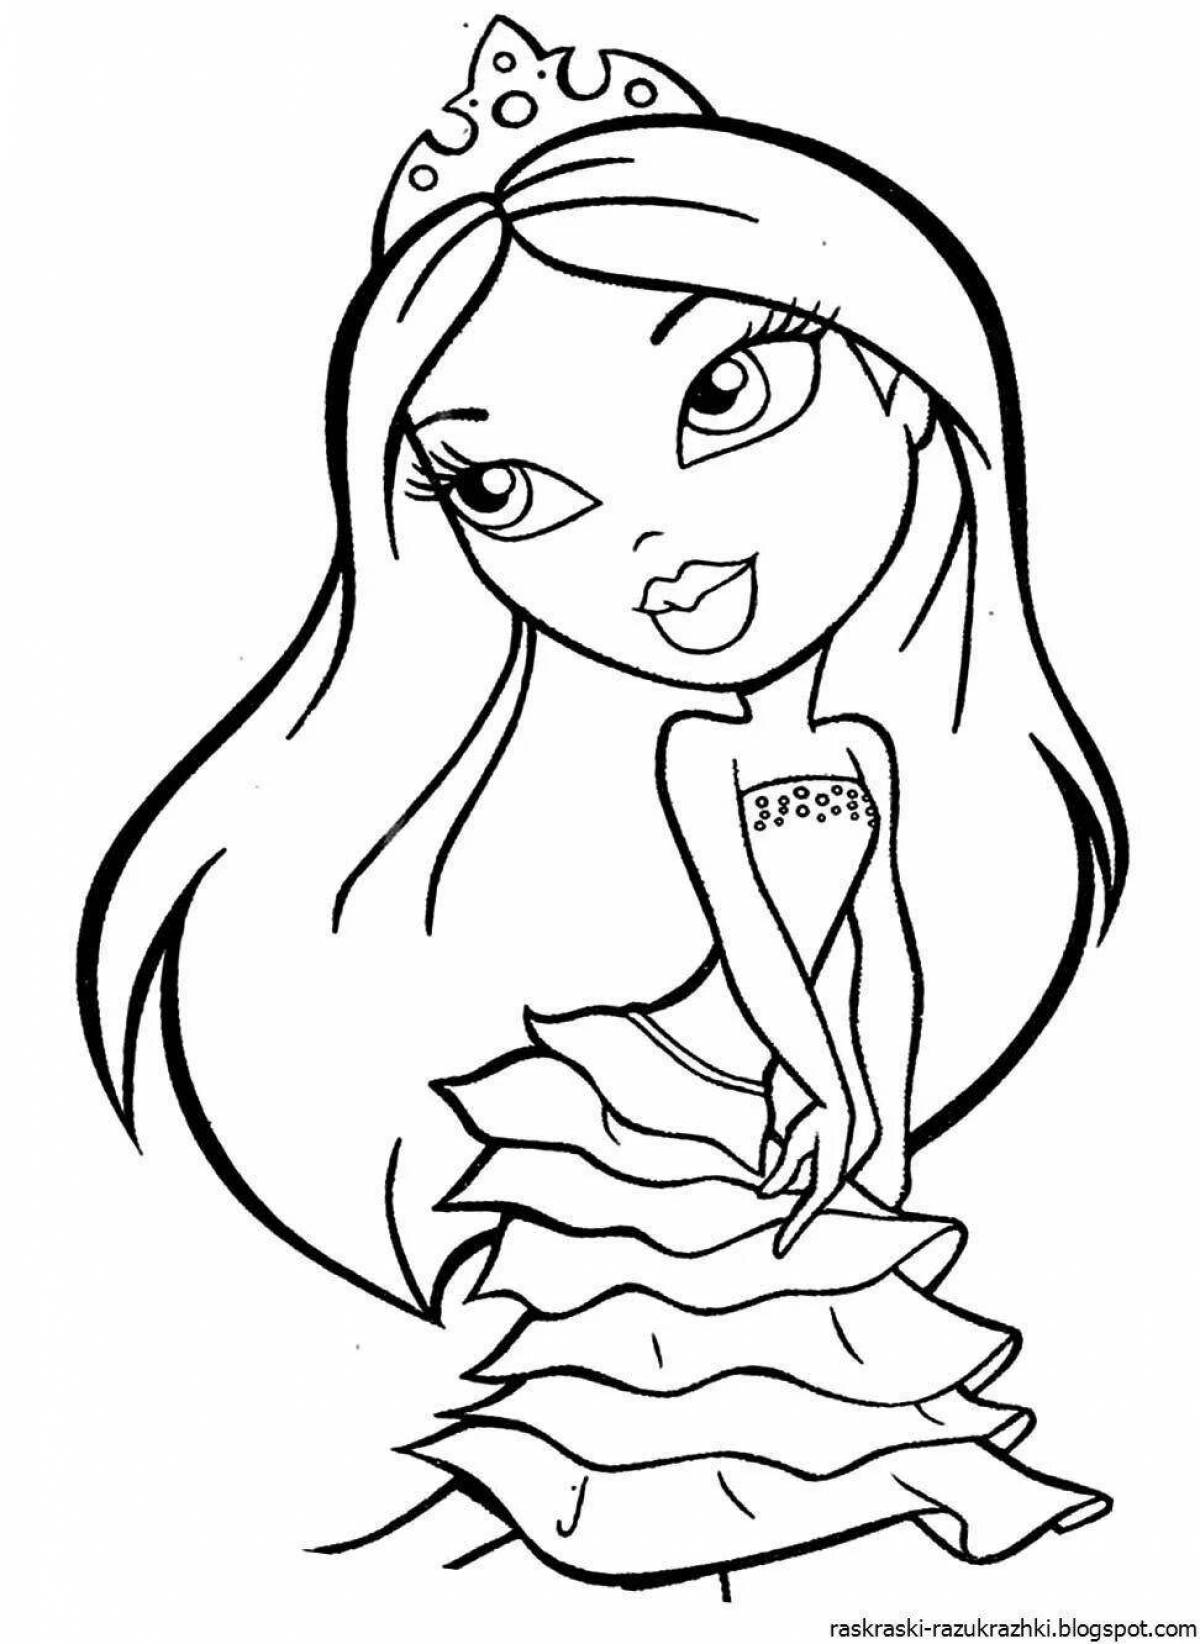 Quirky coloring book for girls full sheet